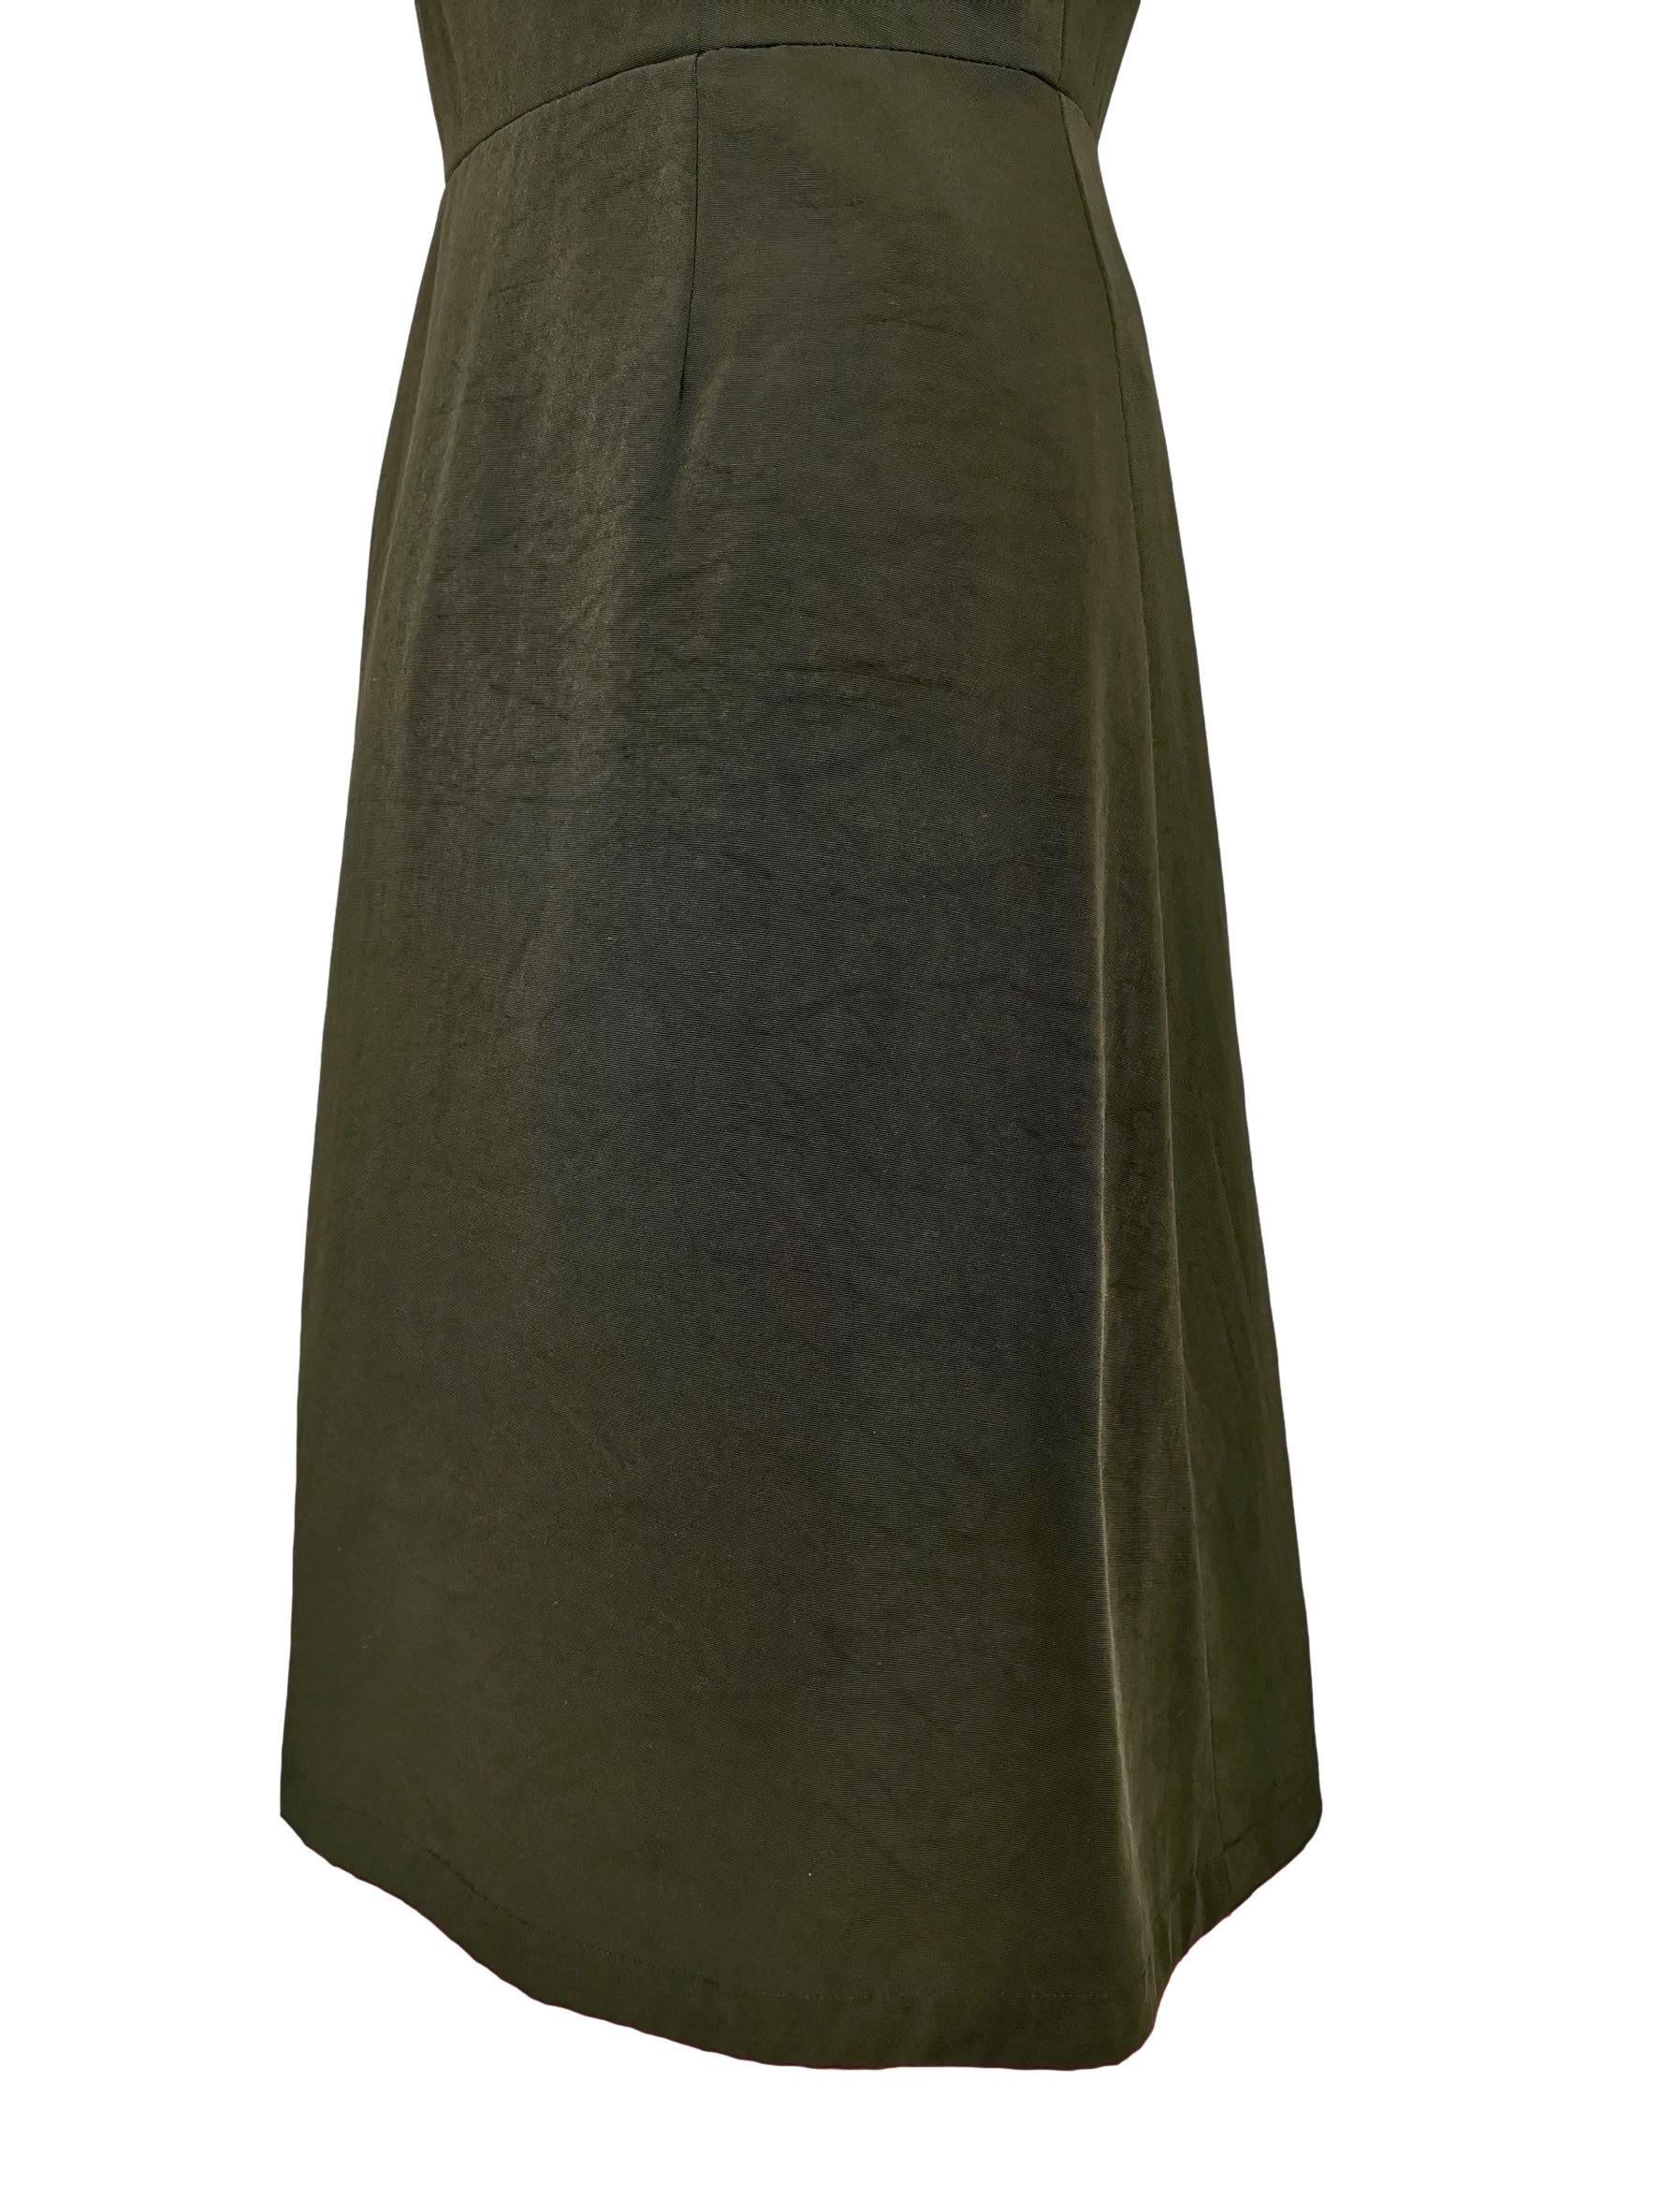 Comme des Garcons Army Green Dress AD 1999 For Sale 1